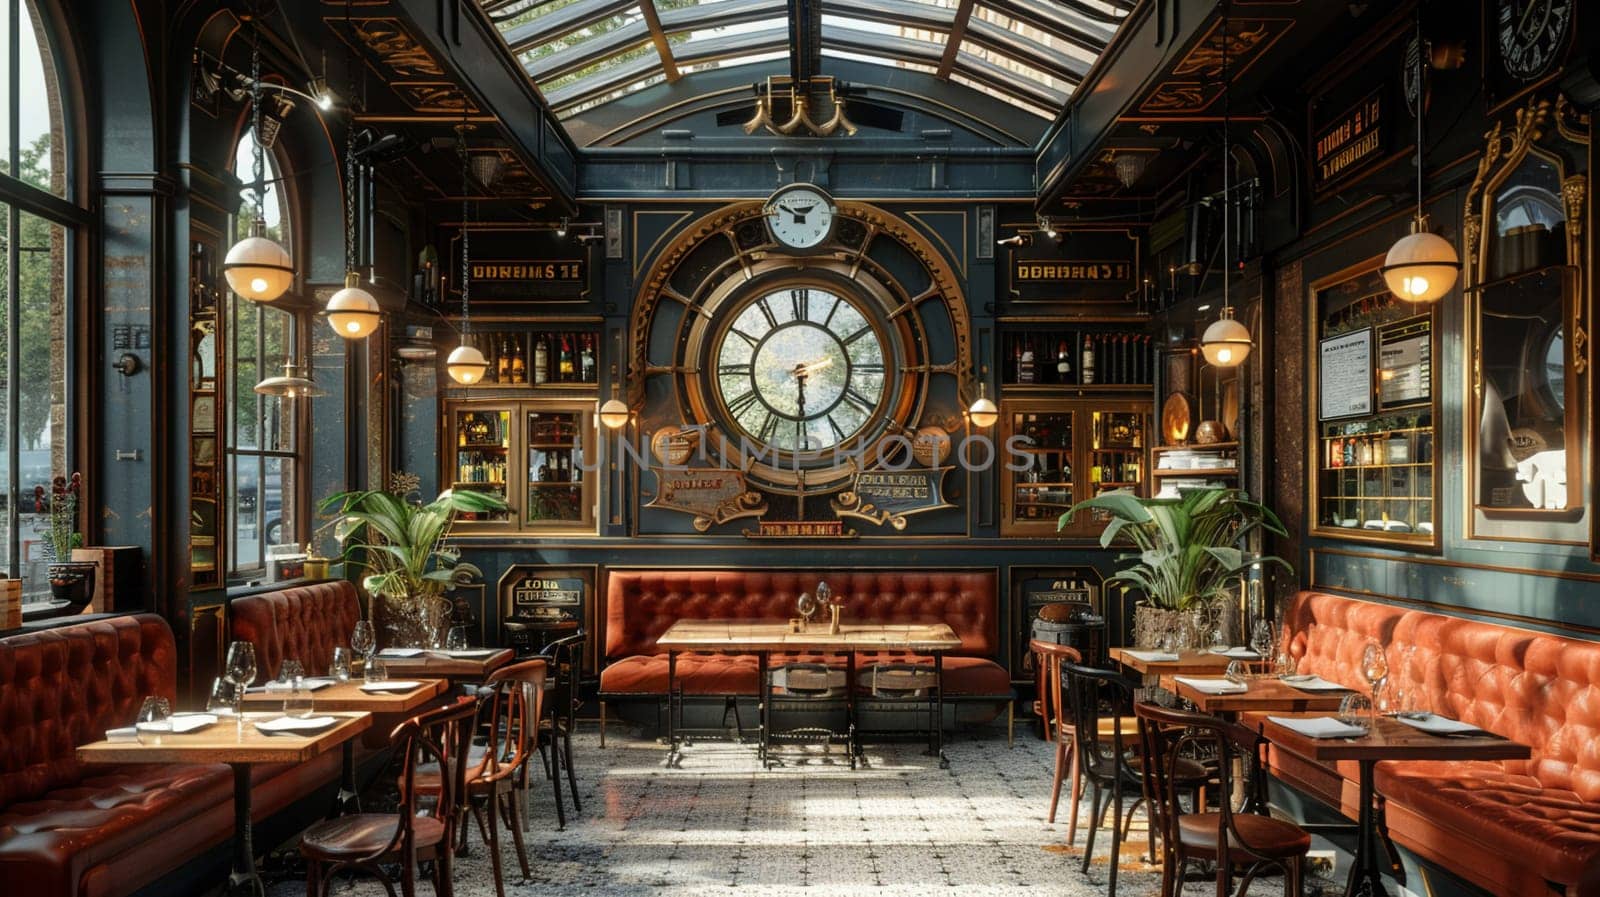 Vintage train-themed restaurant with booth seating in old carriages3D render.